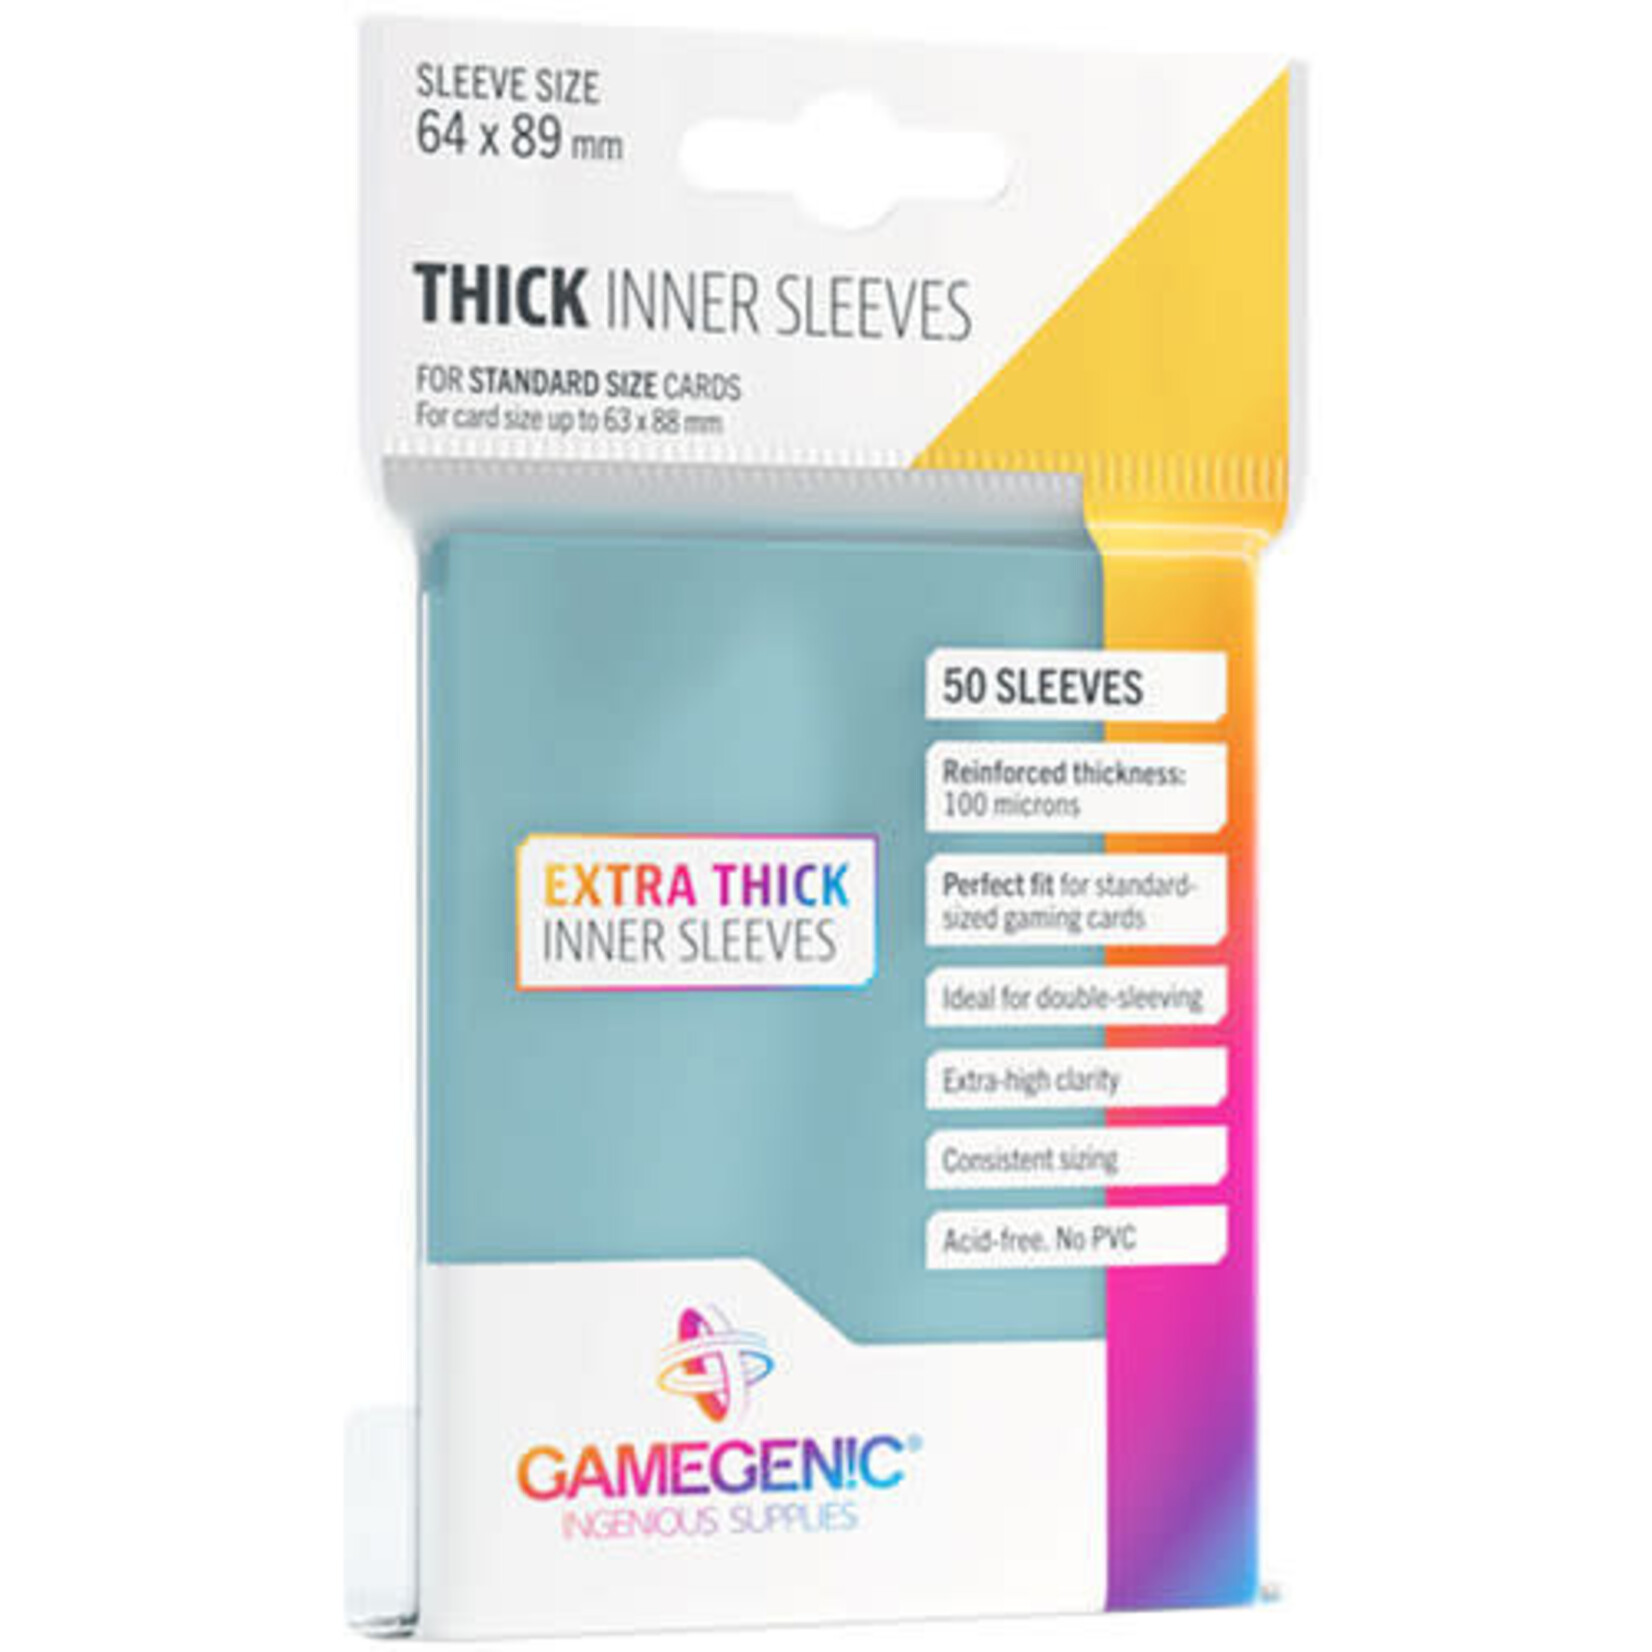 Asmodee GameGenic Thick Inner Sleeves